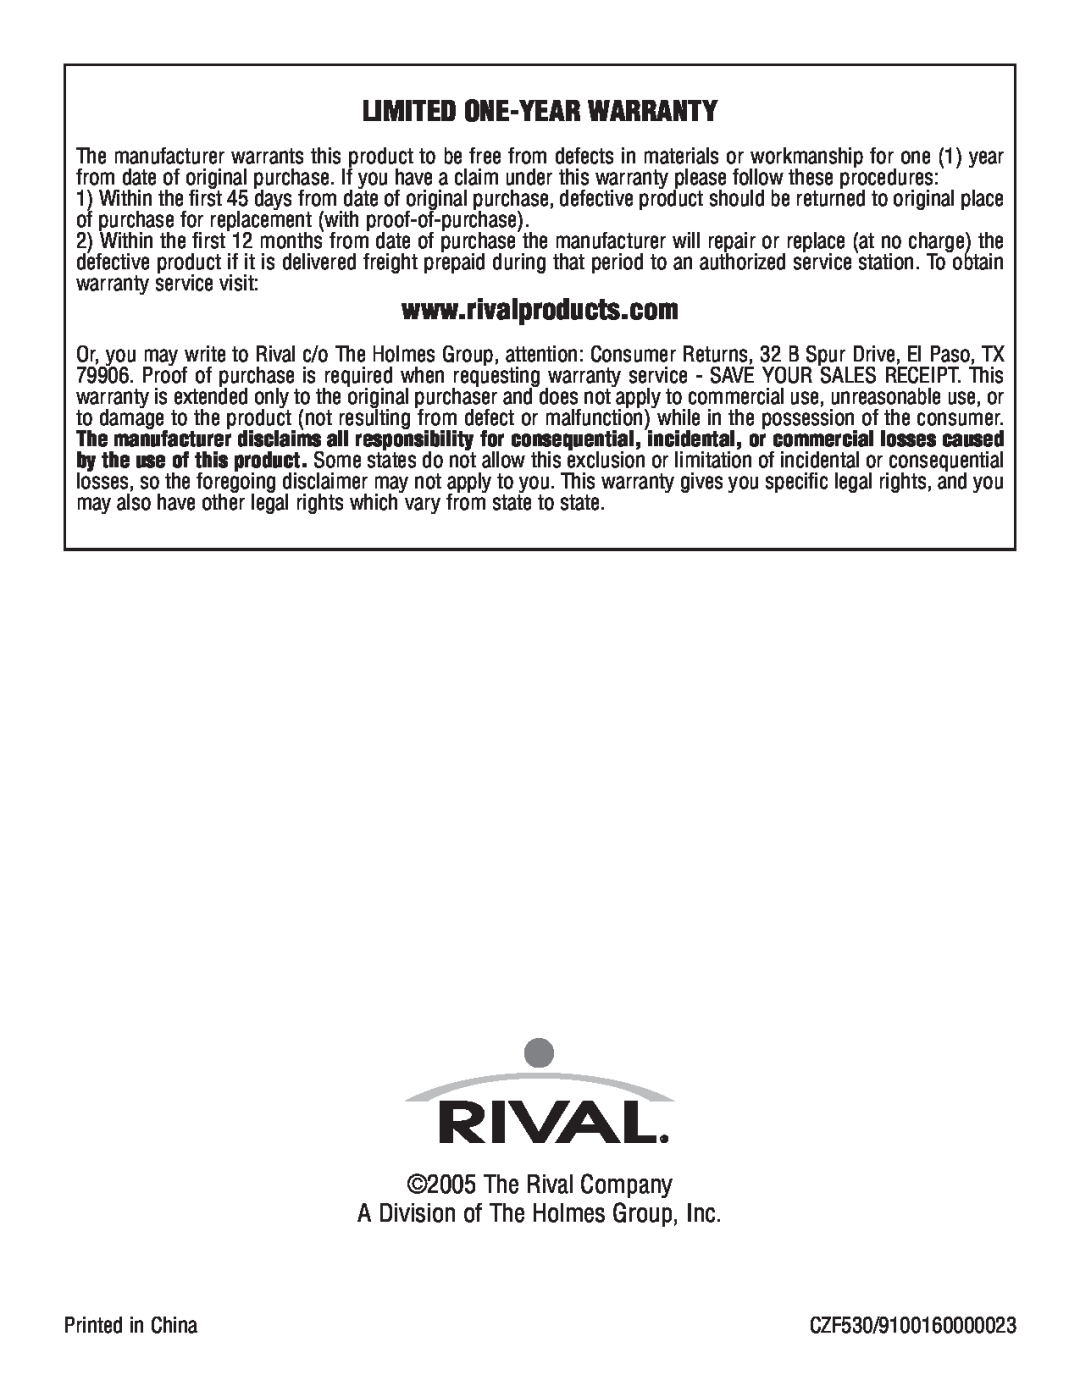 Rival CZF530 manual Limited One-Year Warranty, The Rival Company A Division of The Holmes Group, Inc 